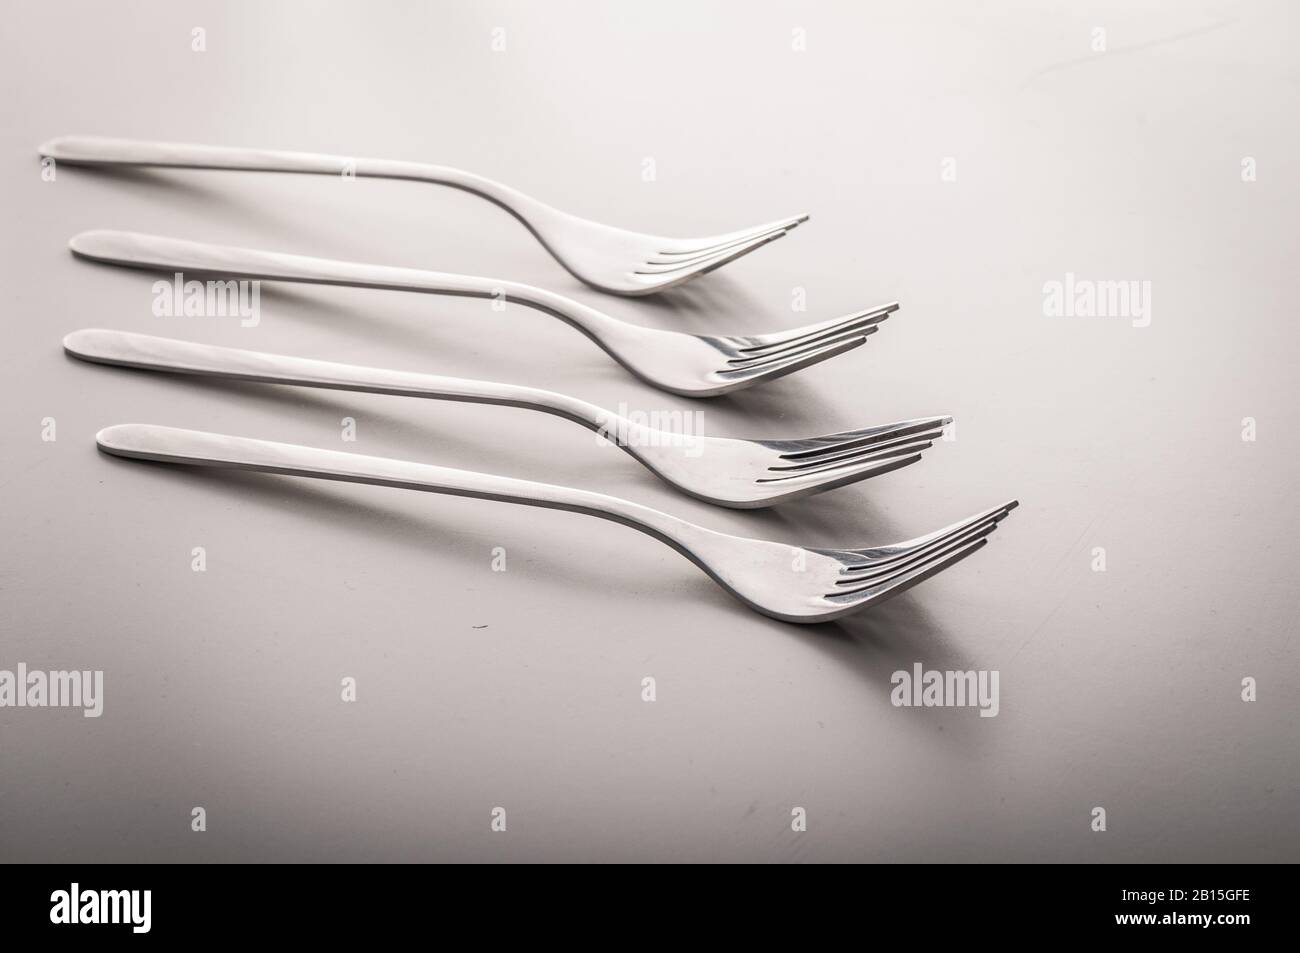 Many shiny gourmet restaurant quality design silver forks laying elegant in a row on a white dining table with copyspace - Concept of dinning cutlery, Stock Photo